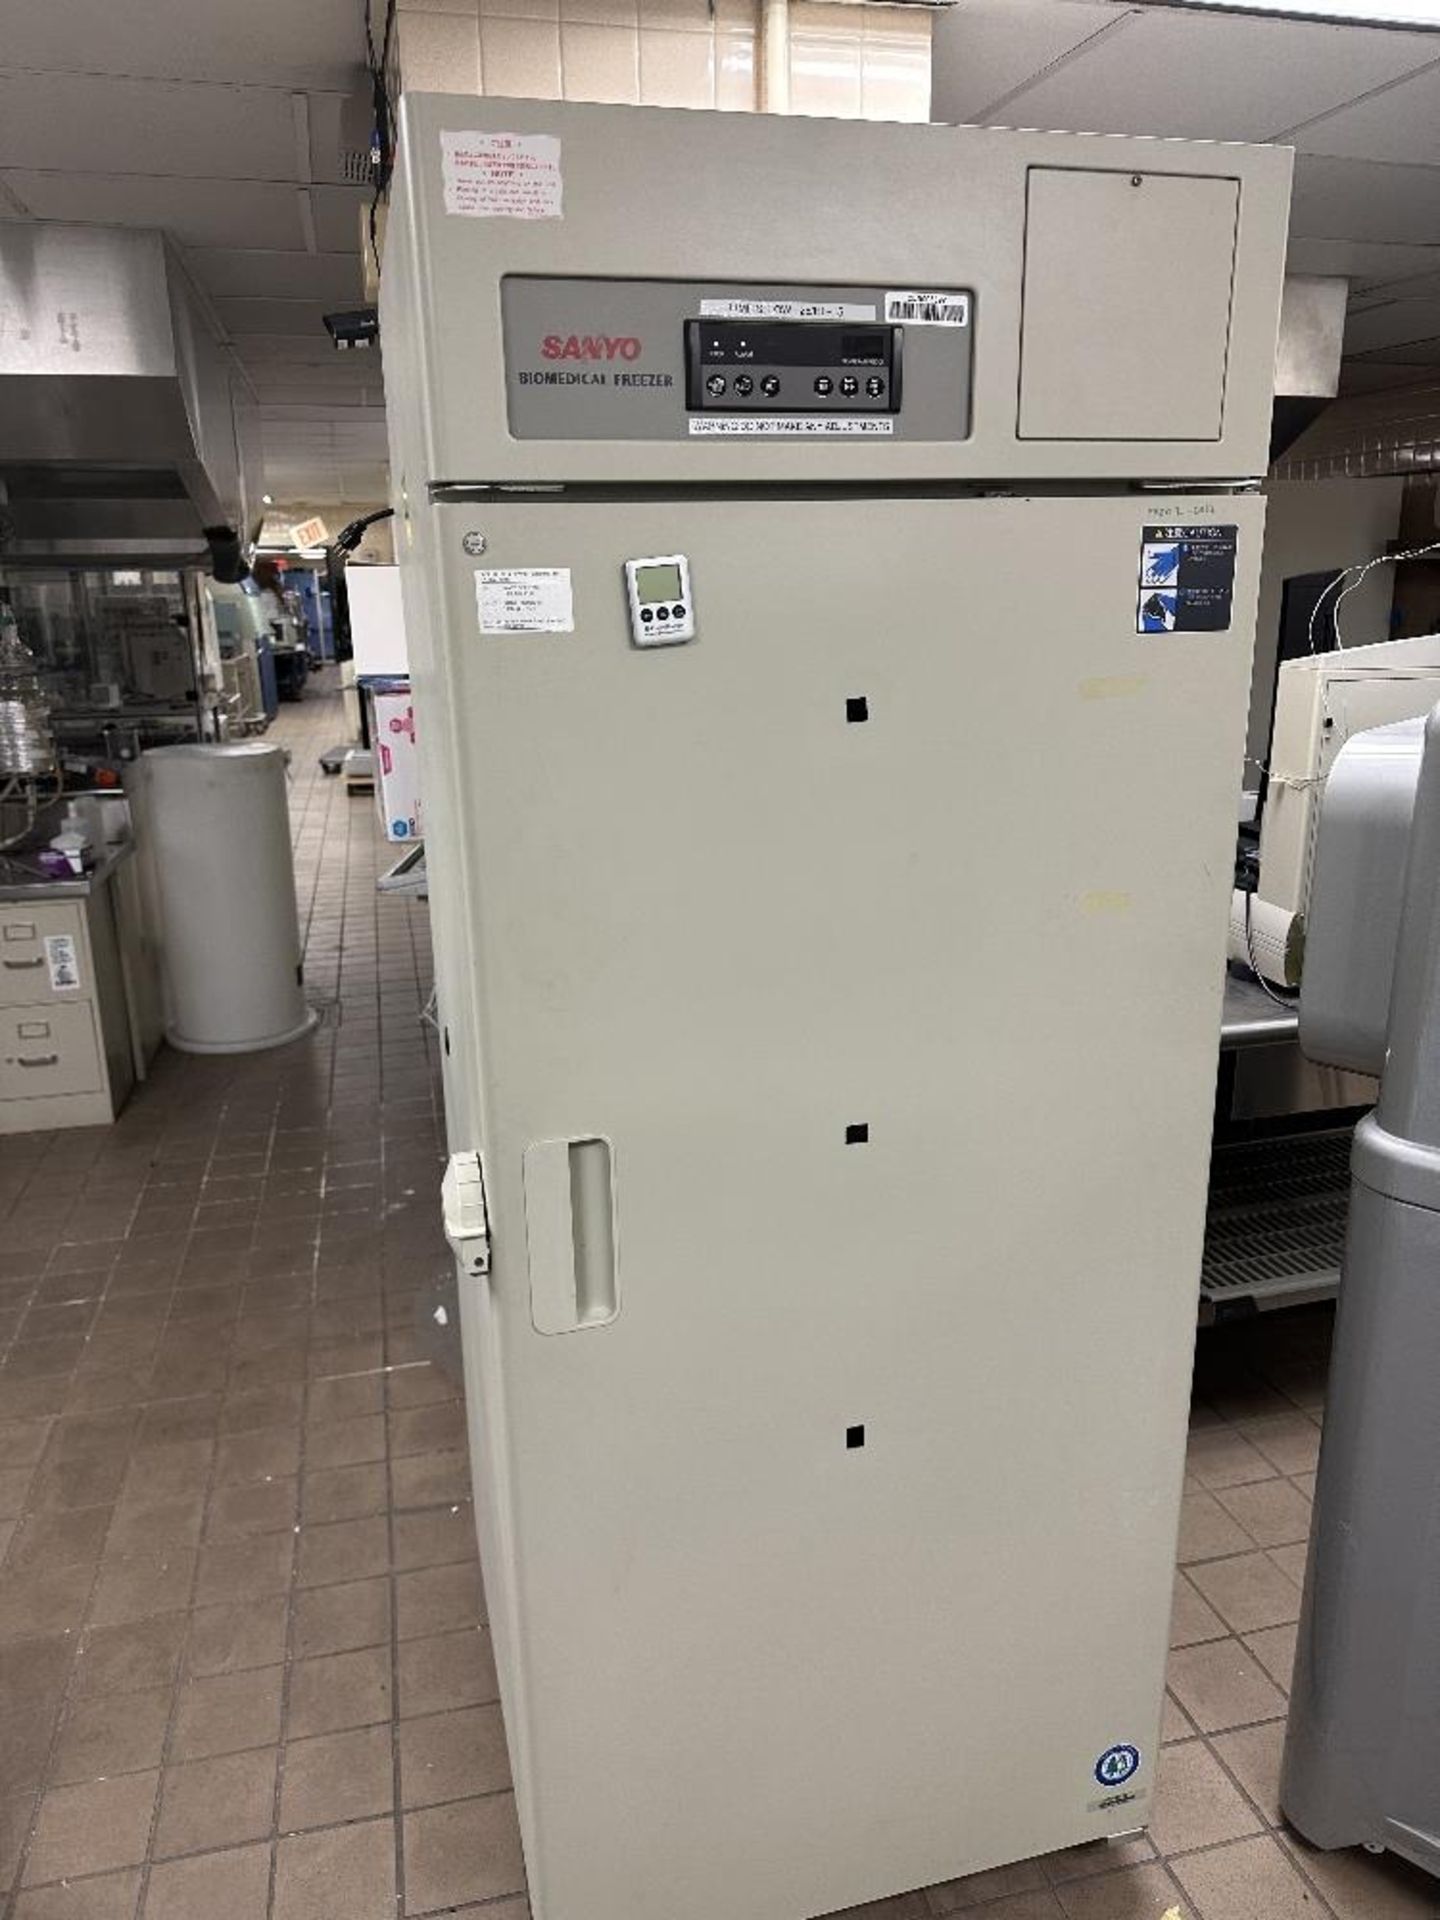 Sanyo MDF-U730 Biomedical Freezer (LOCATED IN MIDDLETOWN, N.Y.)-FOR PACKAGING & SHIPPING QUOTE,